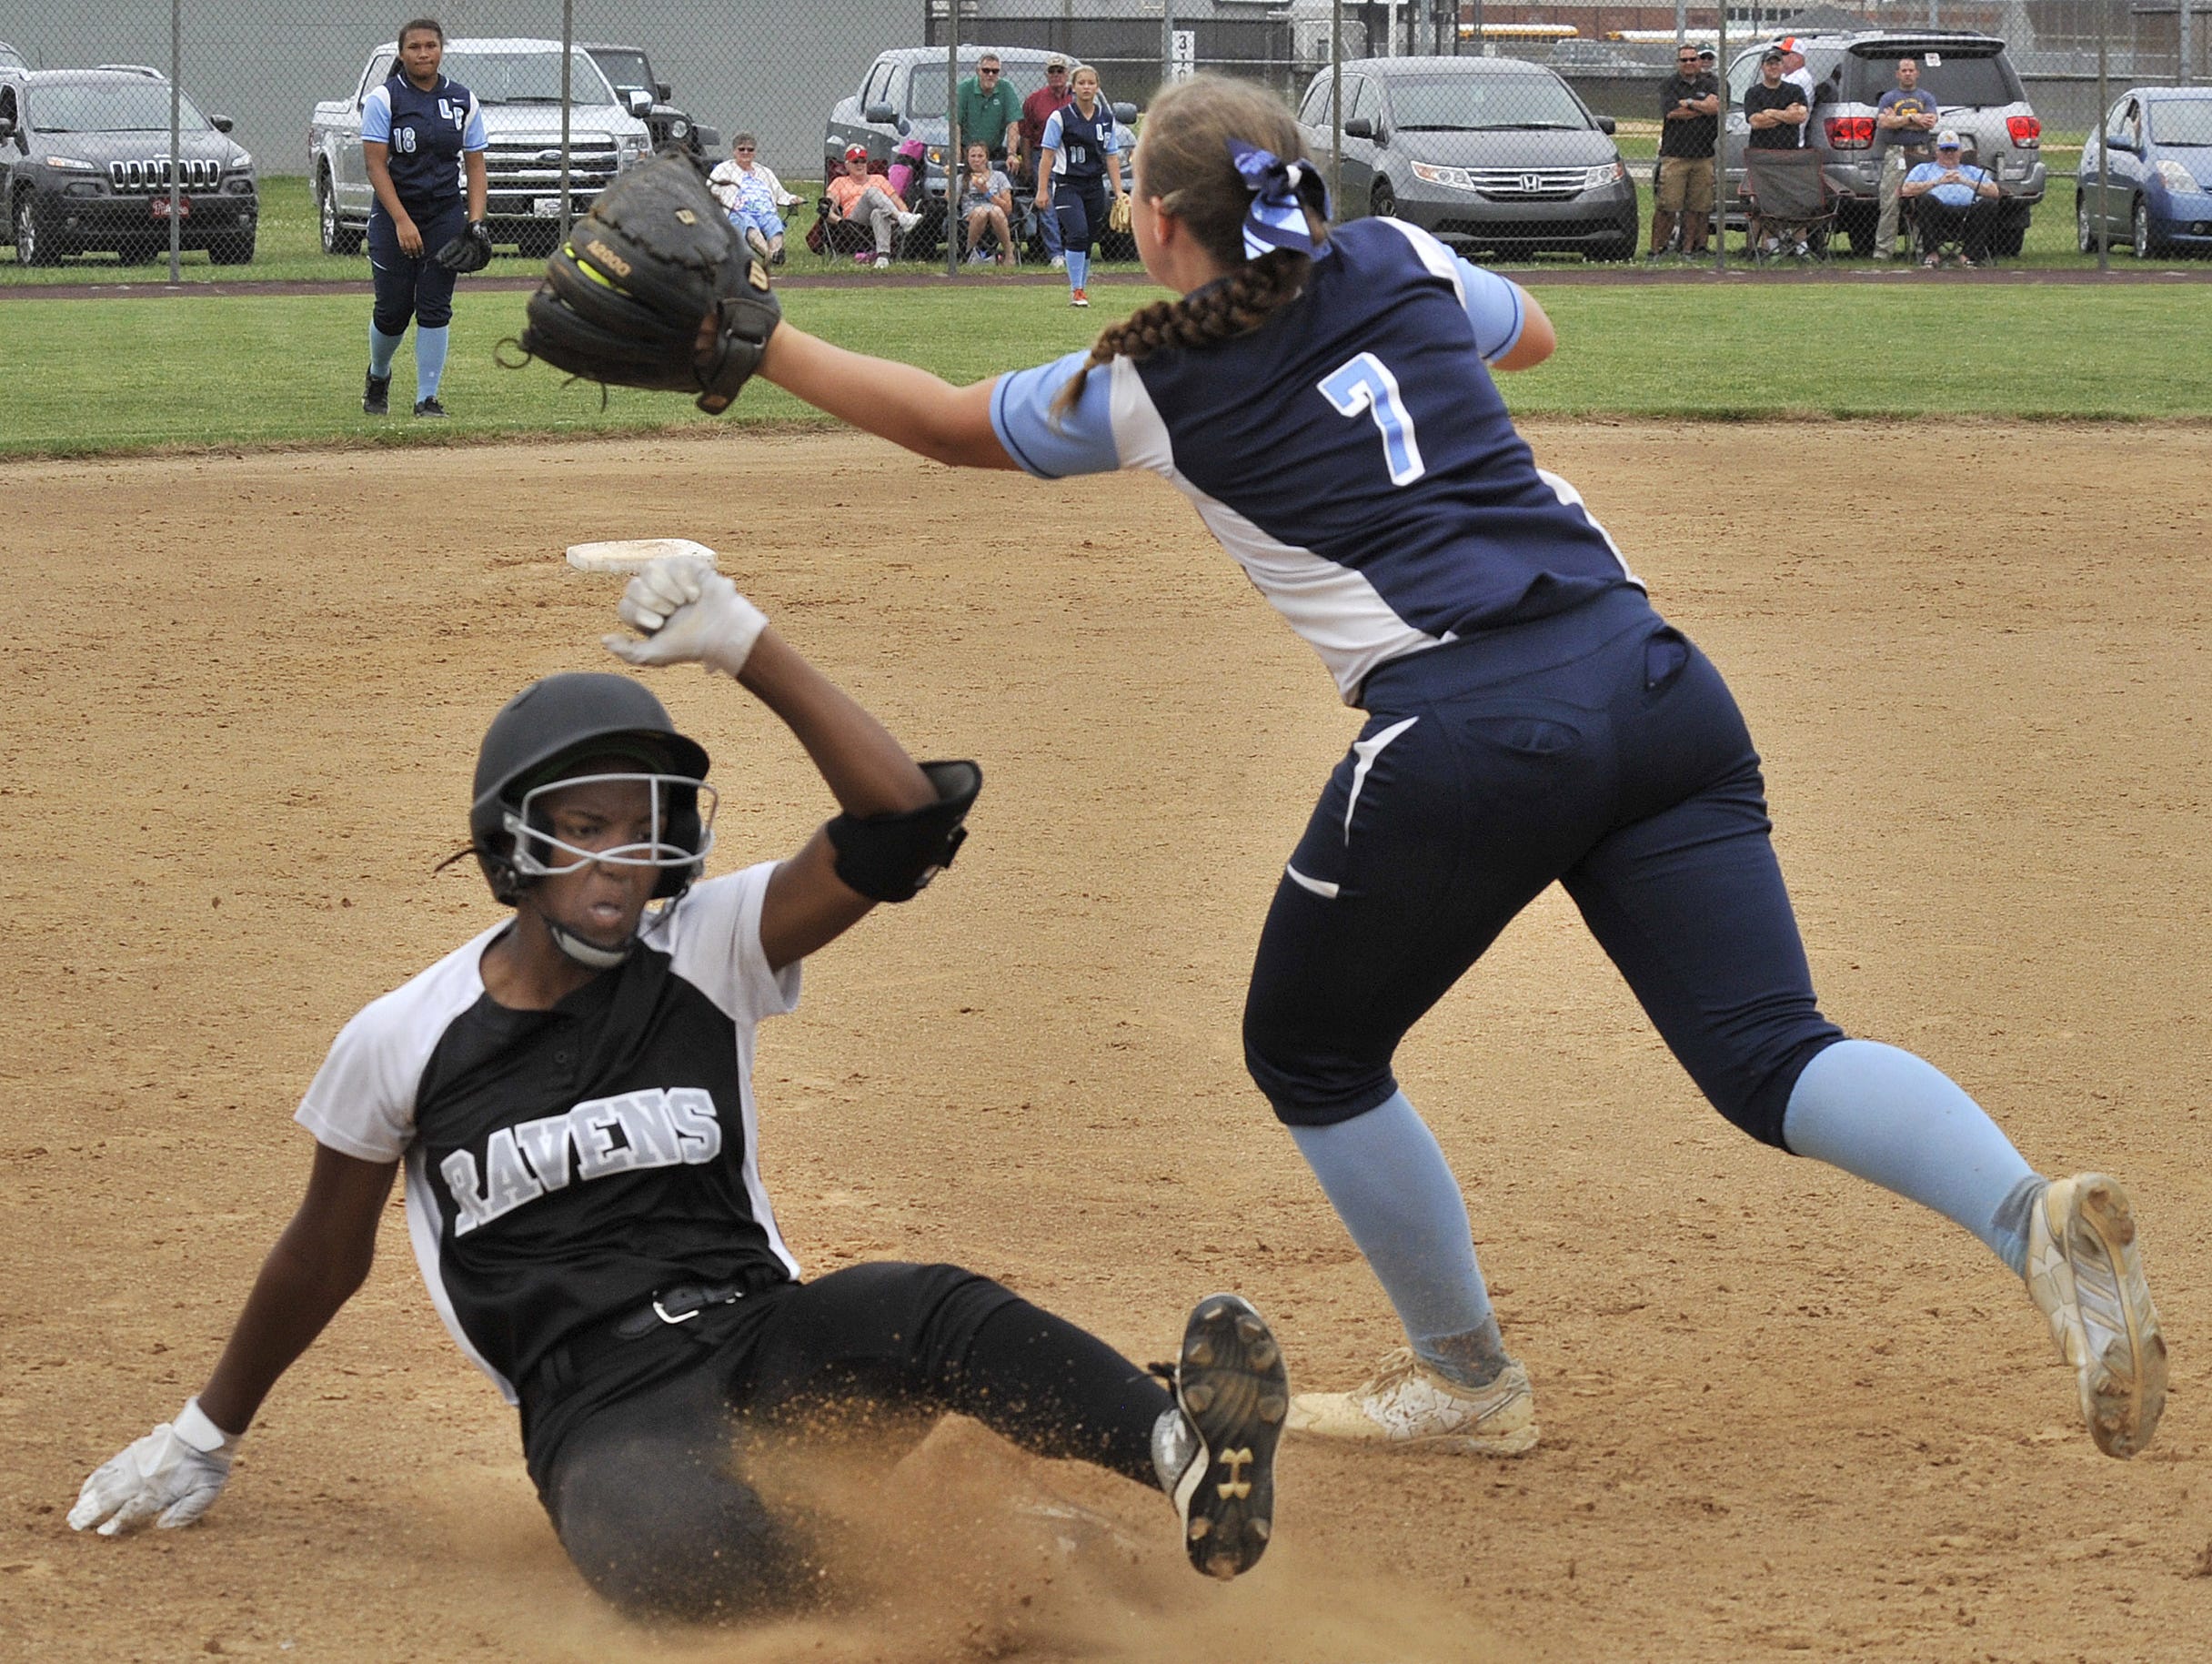 Sussex Tech's Jakayla Sample slides into third with an RBI single that went all the way to the fence and give her team an insurance run in the bottom of the third inning. Spartans' third baseman Brooke Glanden takes the late throw from the outfield.